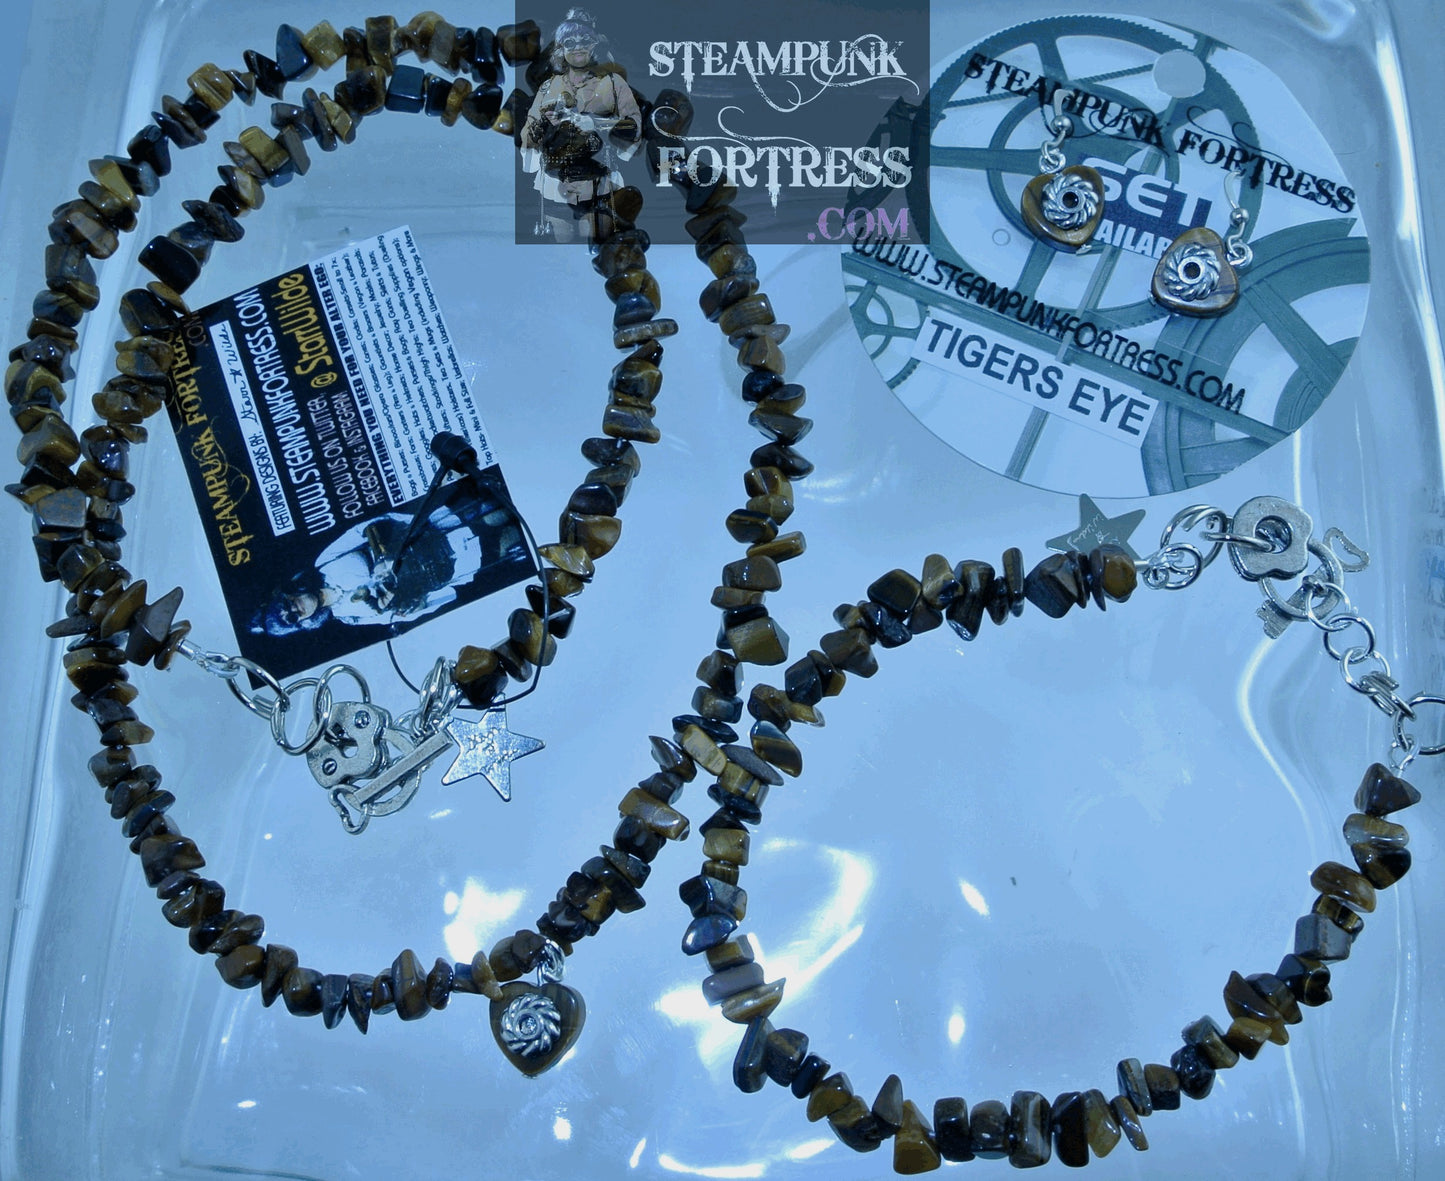 SILVER TIGERS EYE GEMSTONES STONES HEART GEAR CHIPS NECKLACE SET AVAILABLE 2 SIDED REVERSIBLE STARR WILDE STEAMPUNK FORTRESS